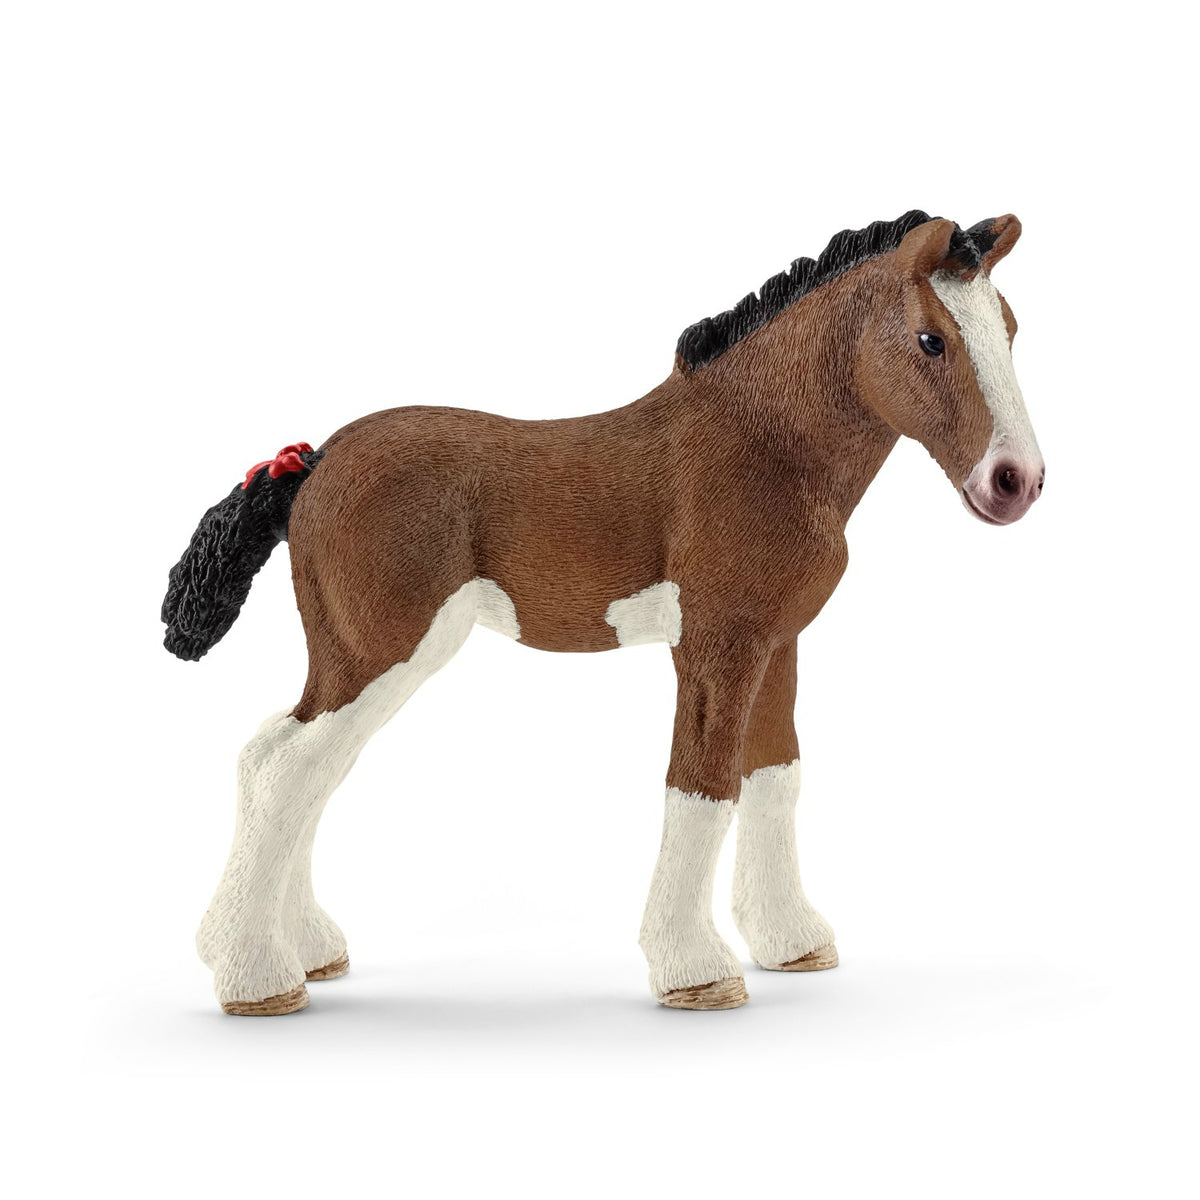 Schleich 13810 Clydesdale Foal Toy